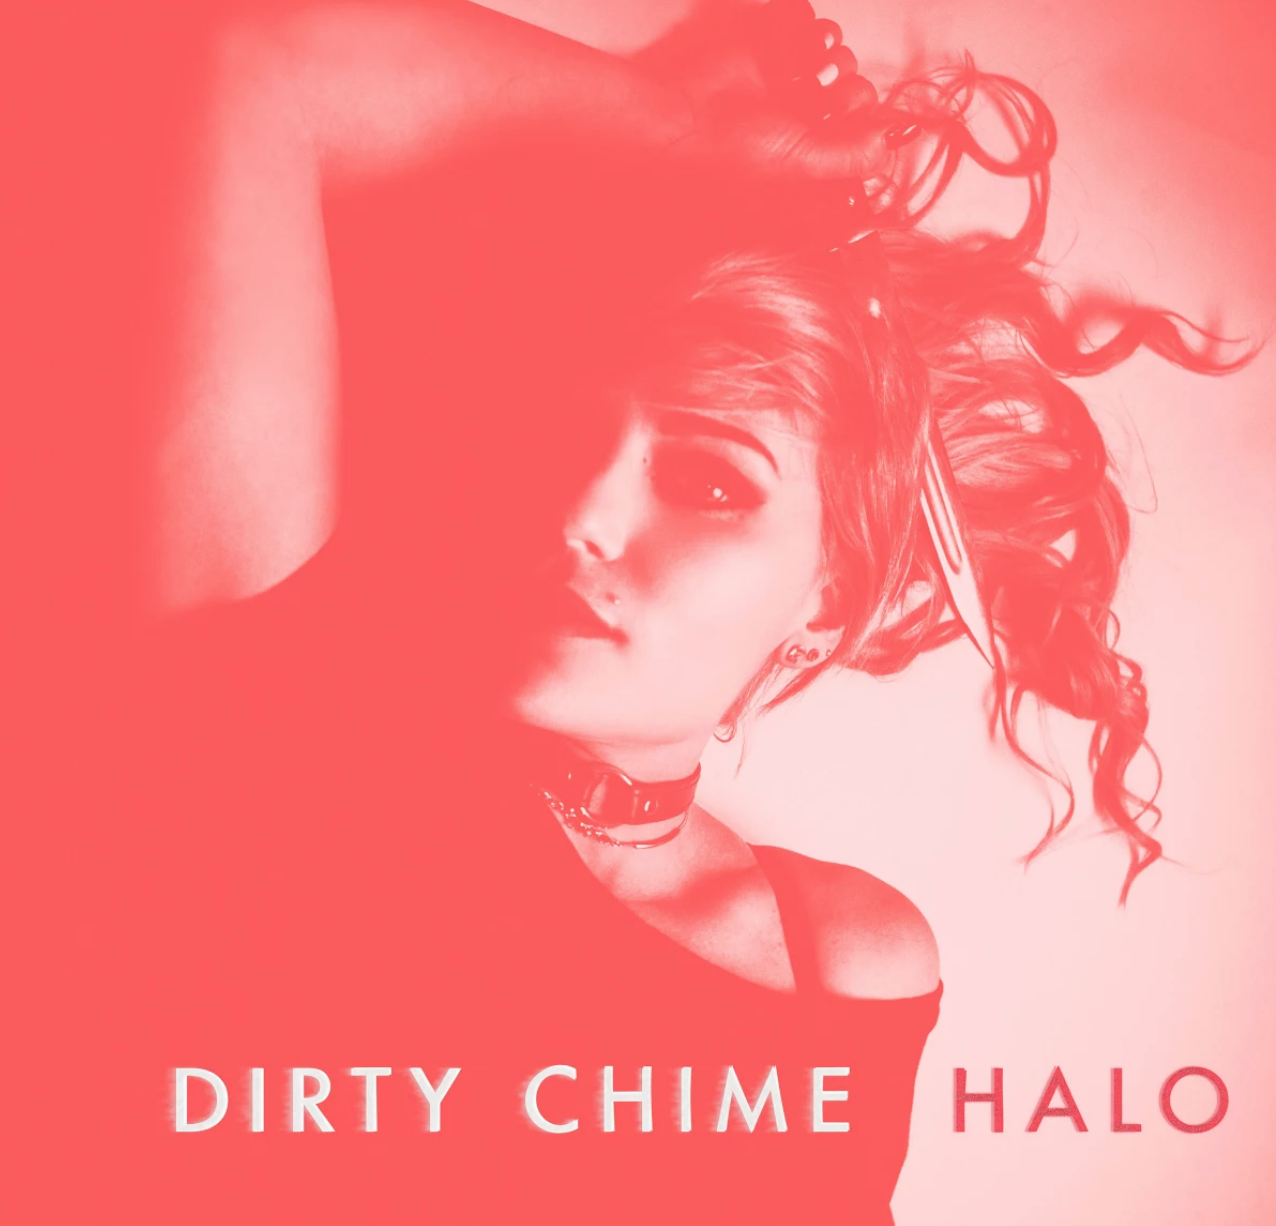 Dirty Chime Ignites His Music Project With First Ecstatic Single “Halo”